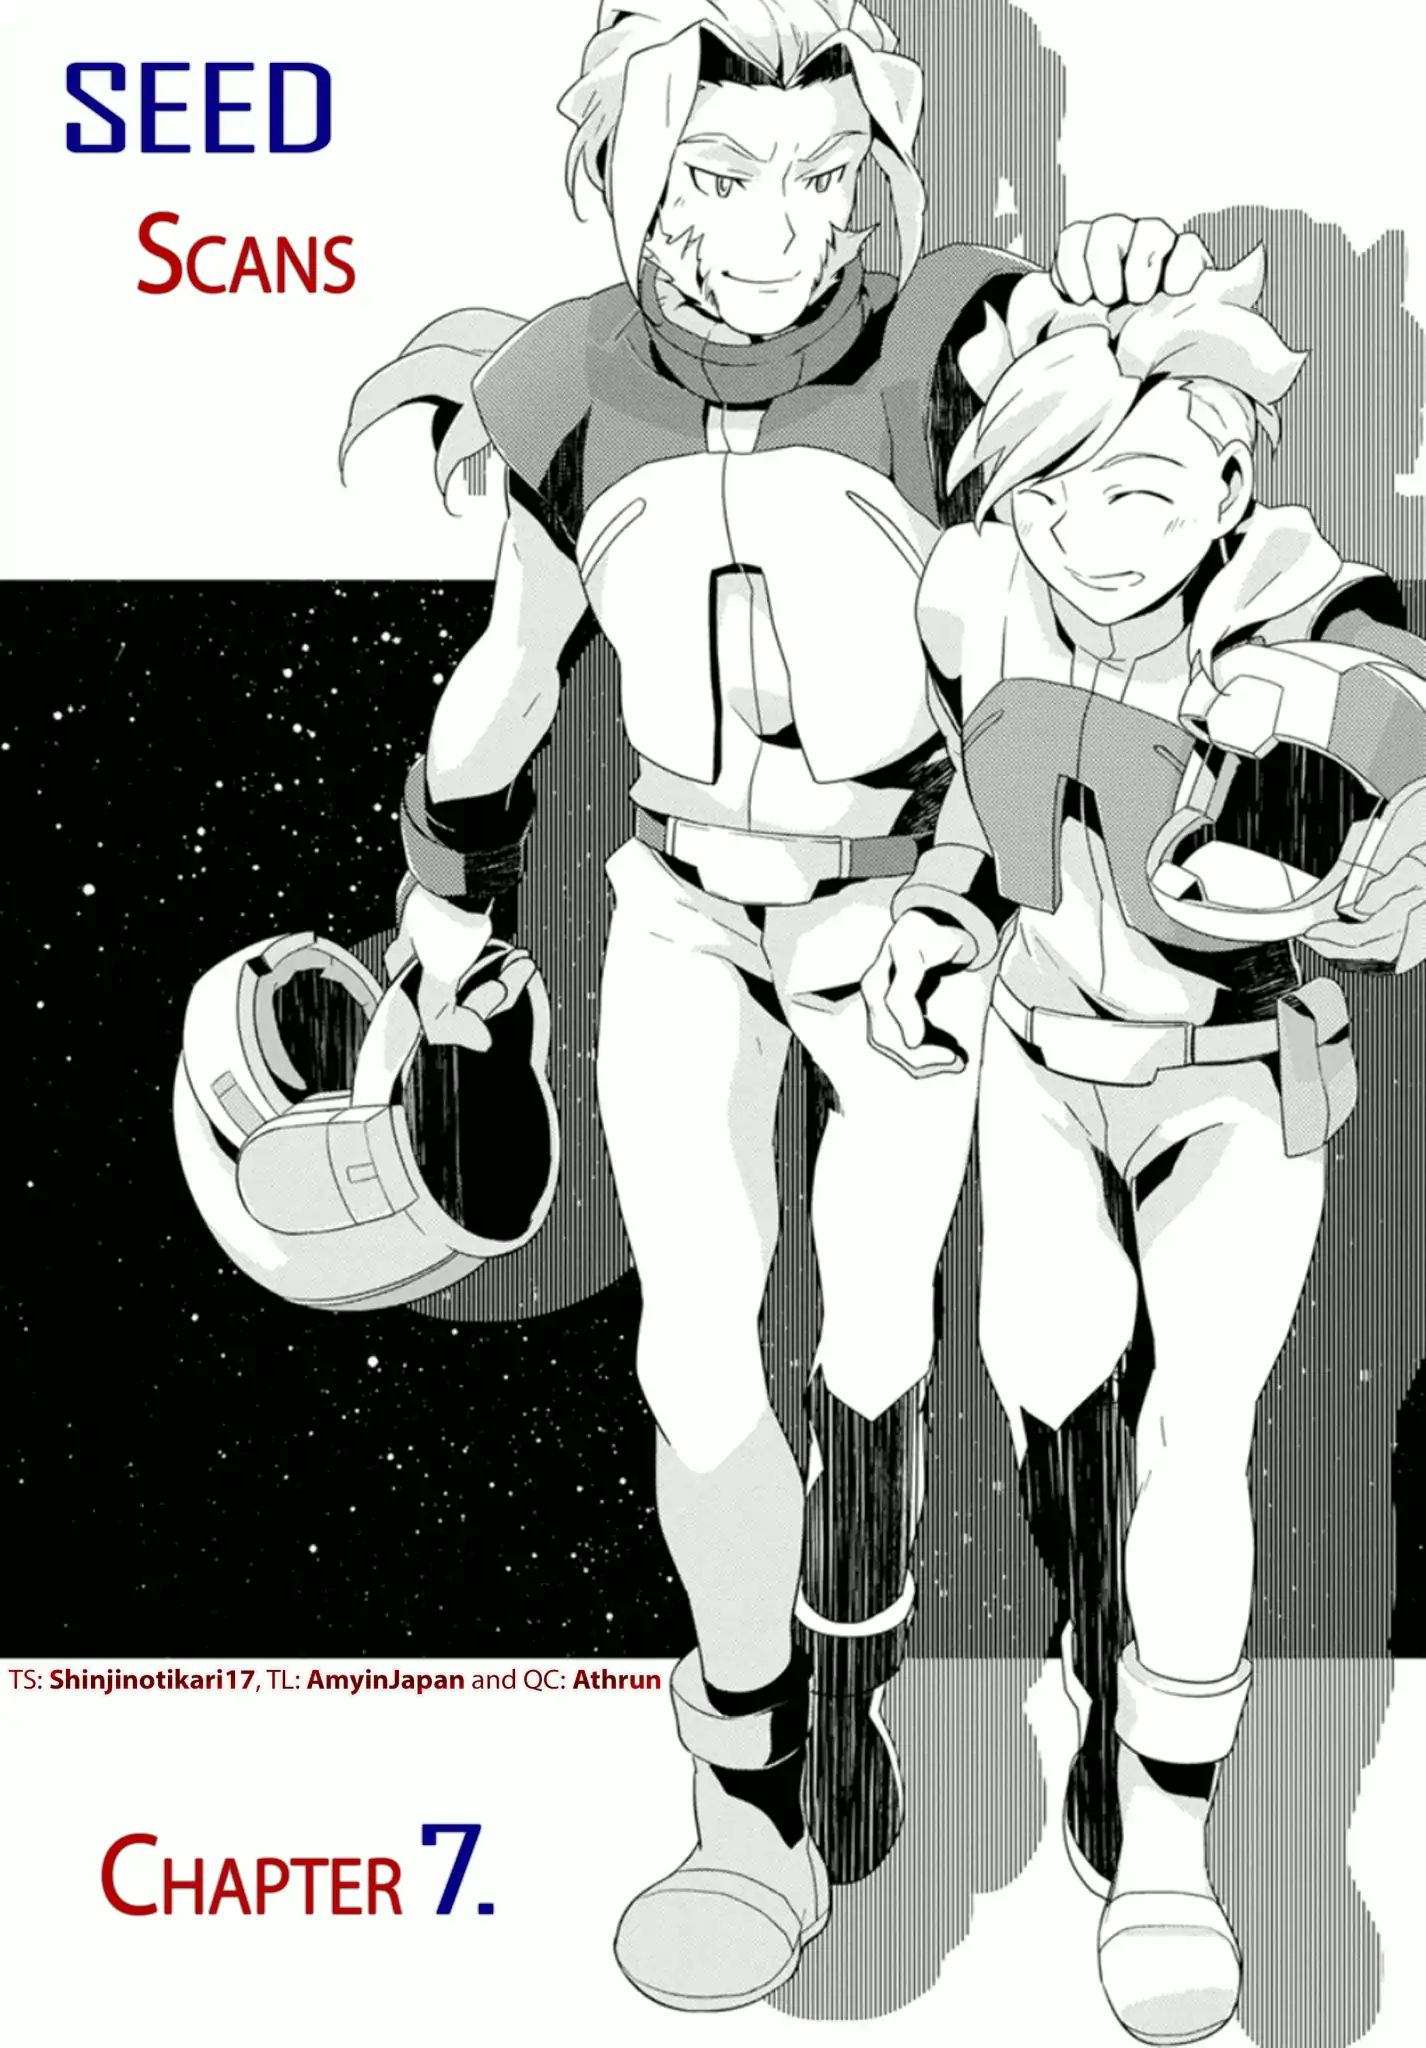 Mobile Suit Gundam Age - Second Evolution Vol.2 Chapter 7: Earth, This Is Eden - Picture 1